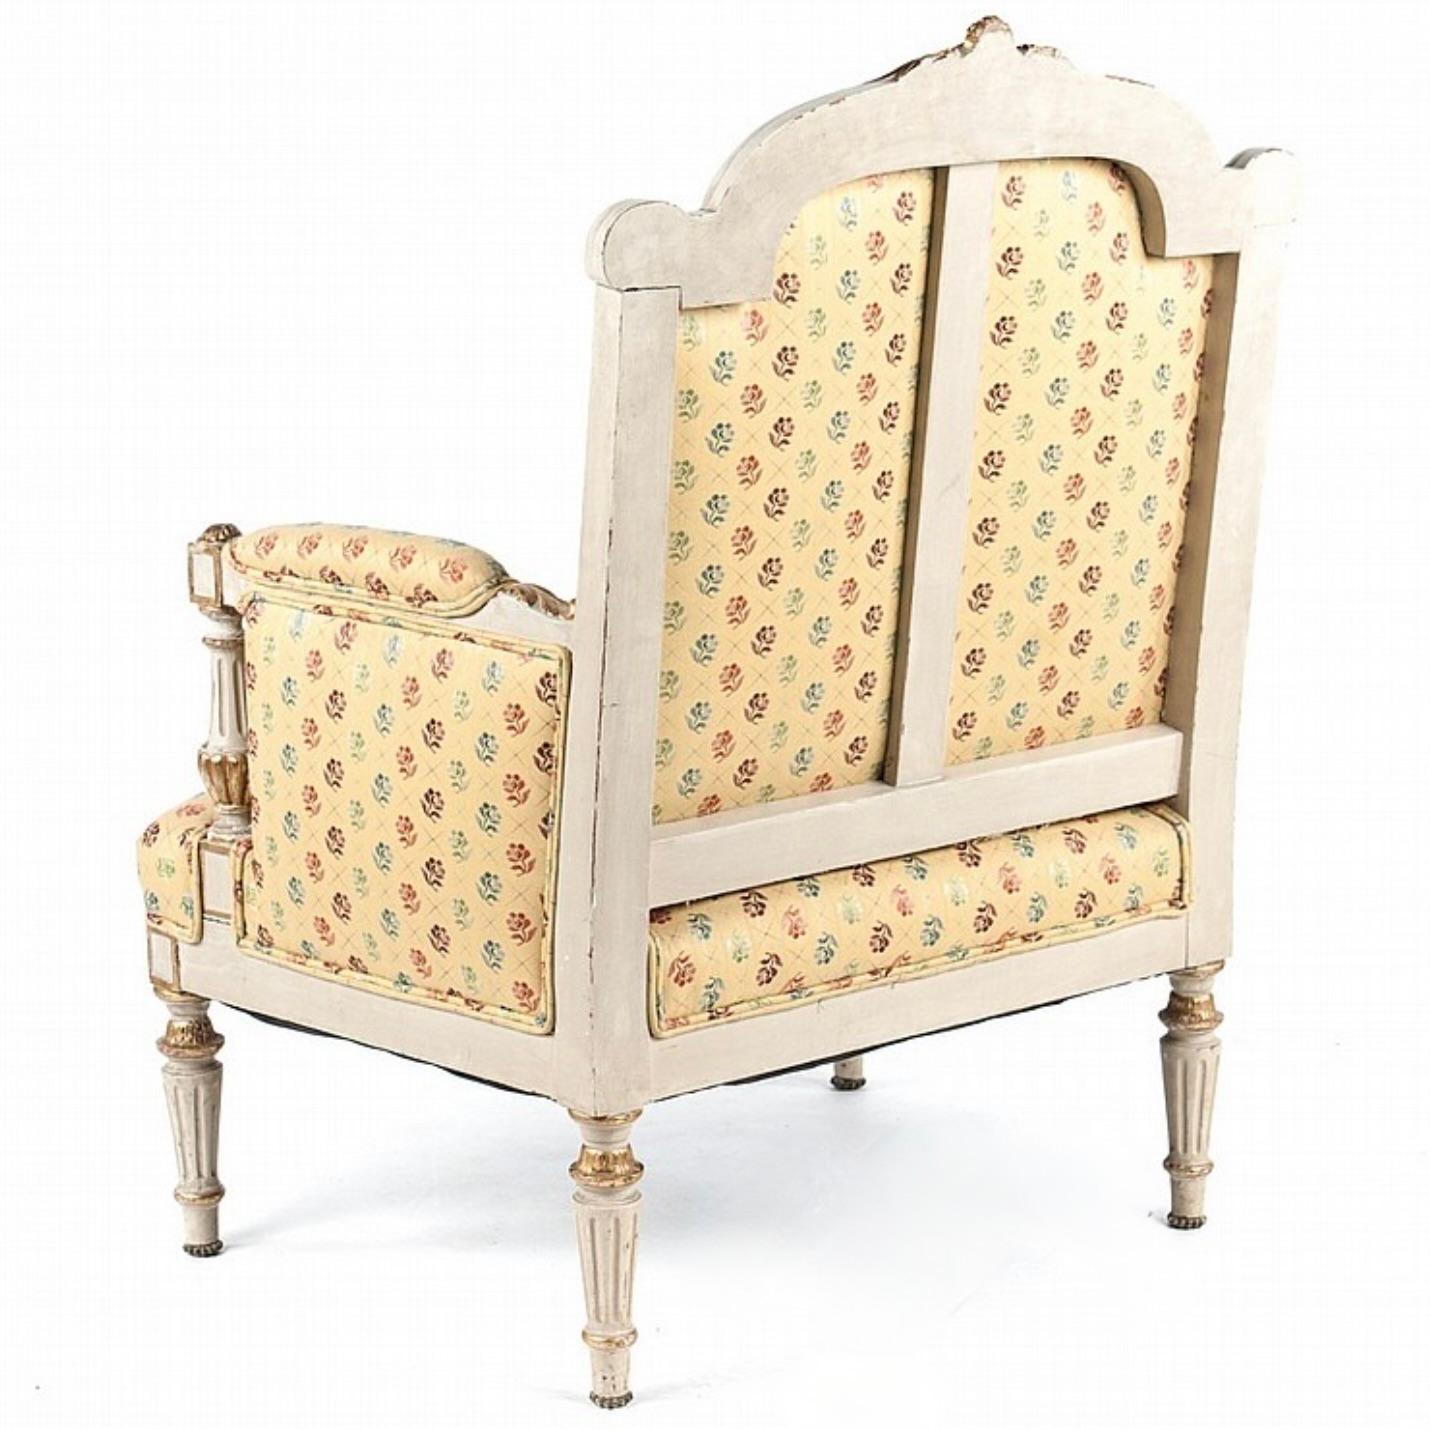 A charming ca. 1850 cream and gilt armchair of generous proportions, on tapered fluted legs, and with upright fluted baluster armrests in the Louis XVI manner. The back is arched with gilded scroll terminals to the crest rail, embellished with a